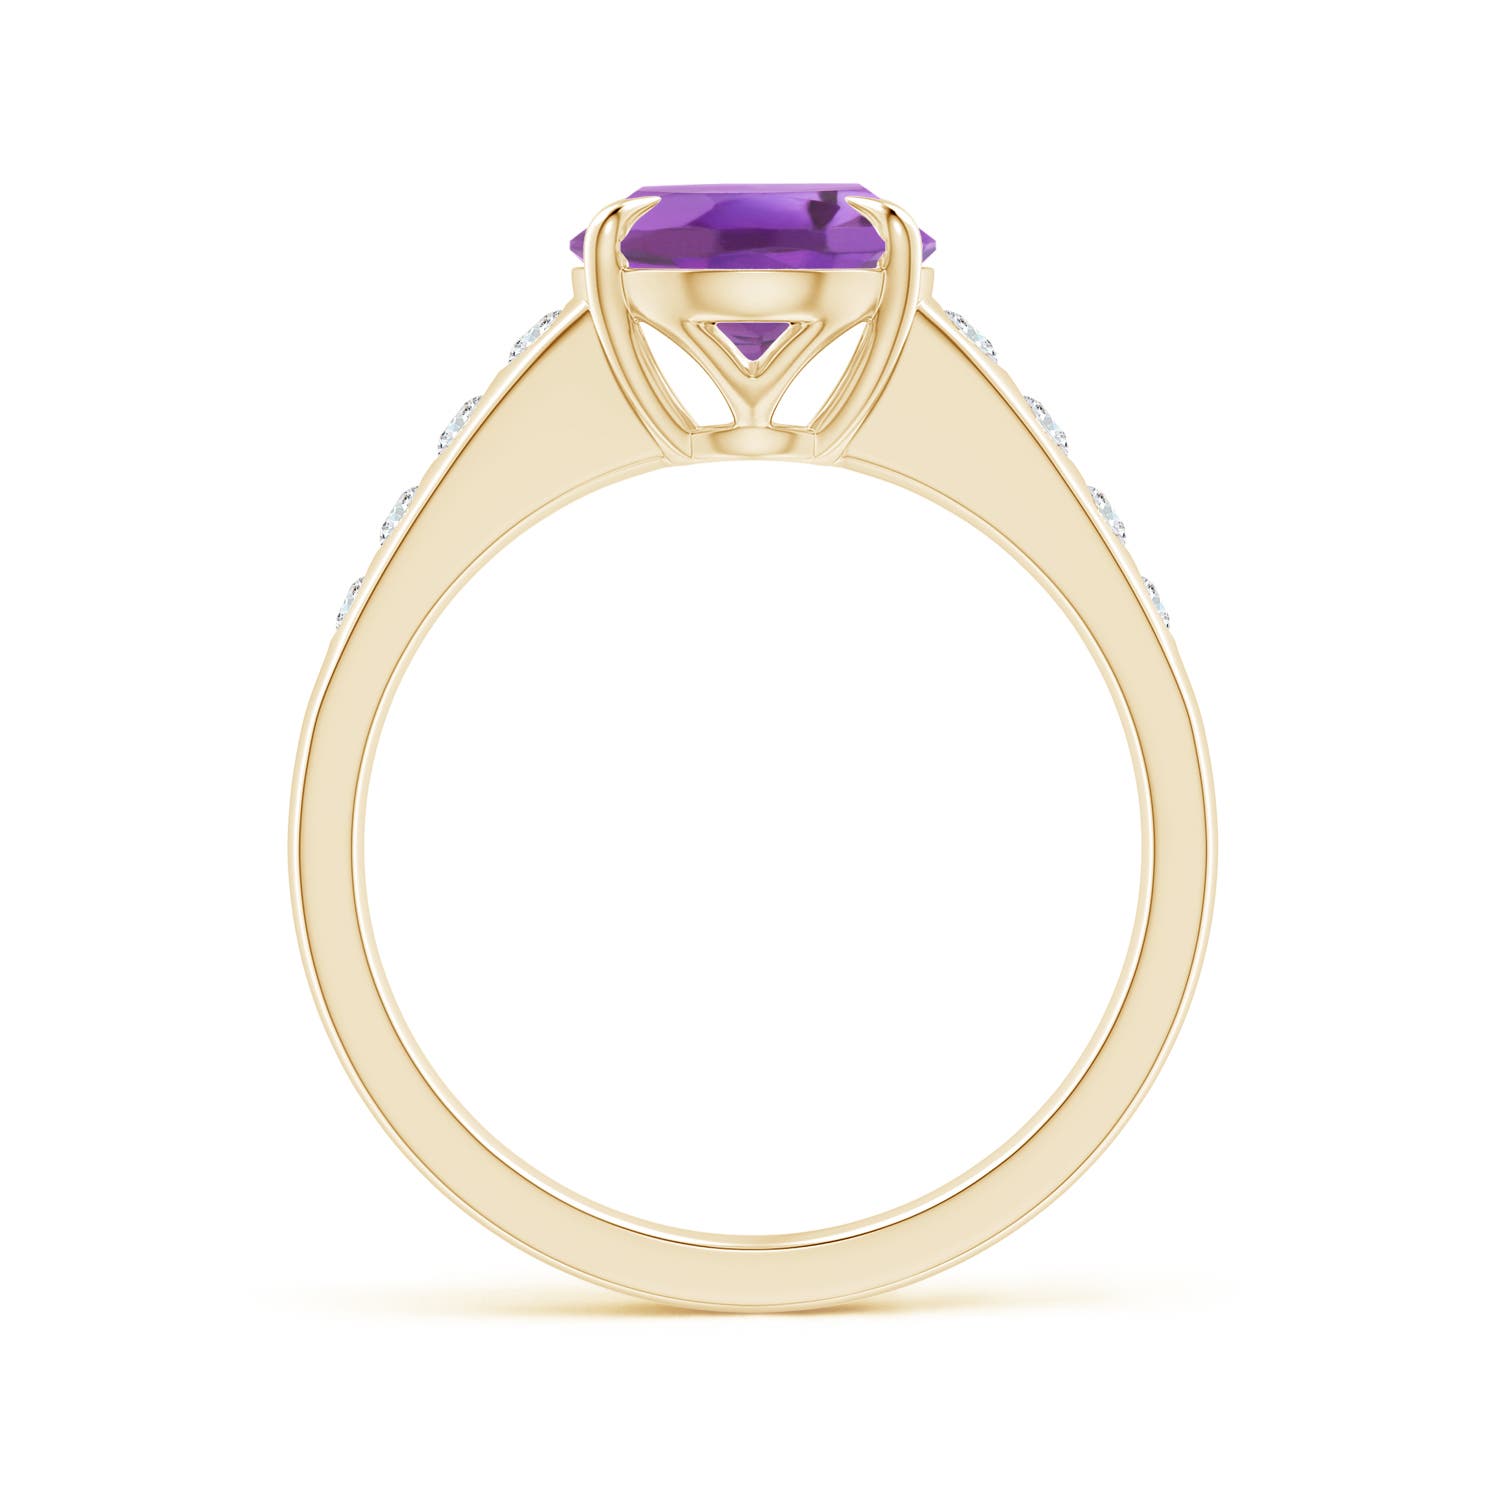 A - Amethyst / 2.5 CT / 14 KT Yellow Gold